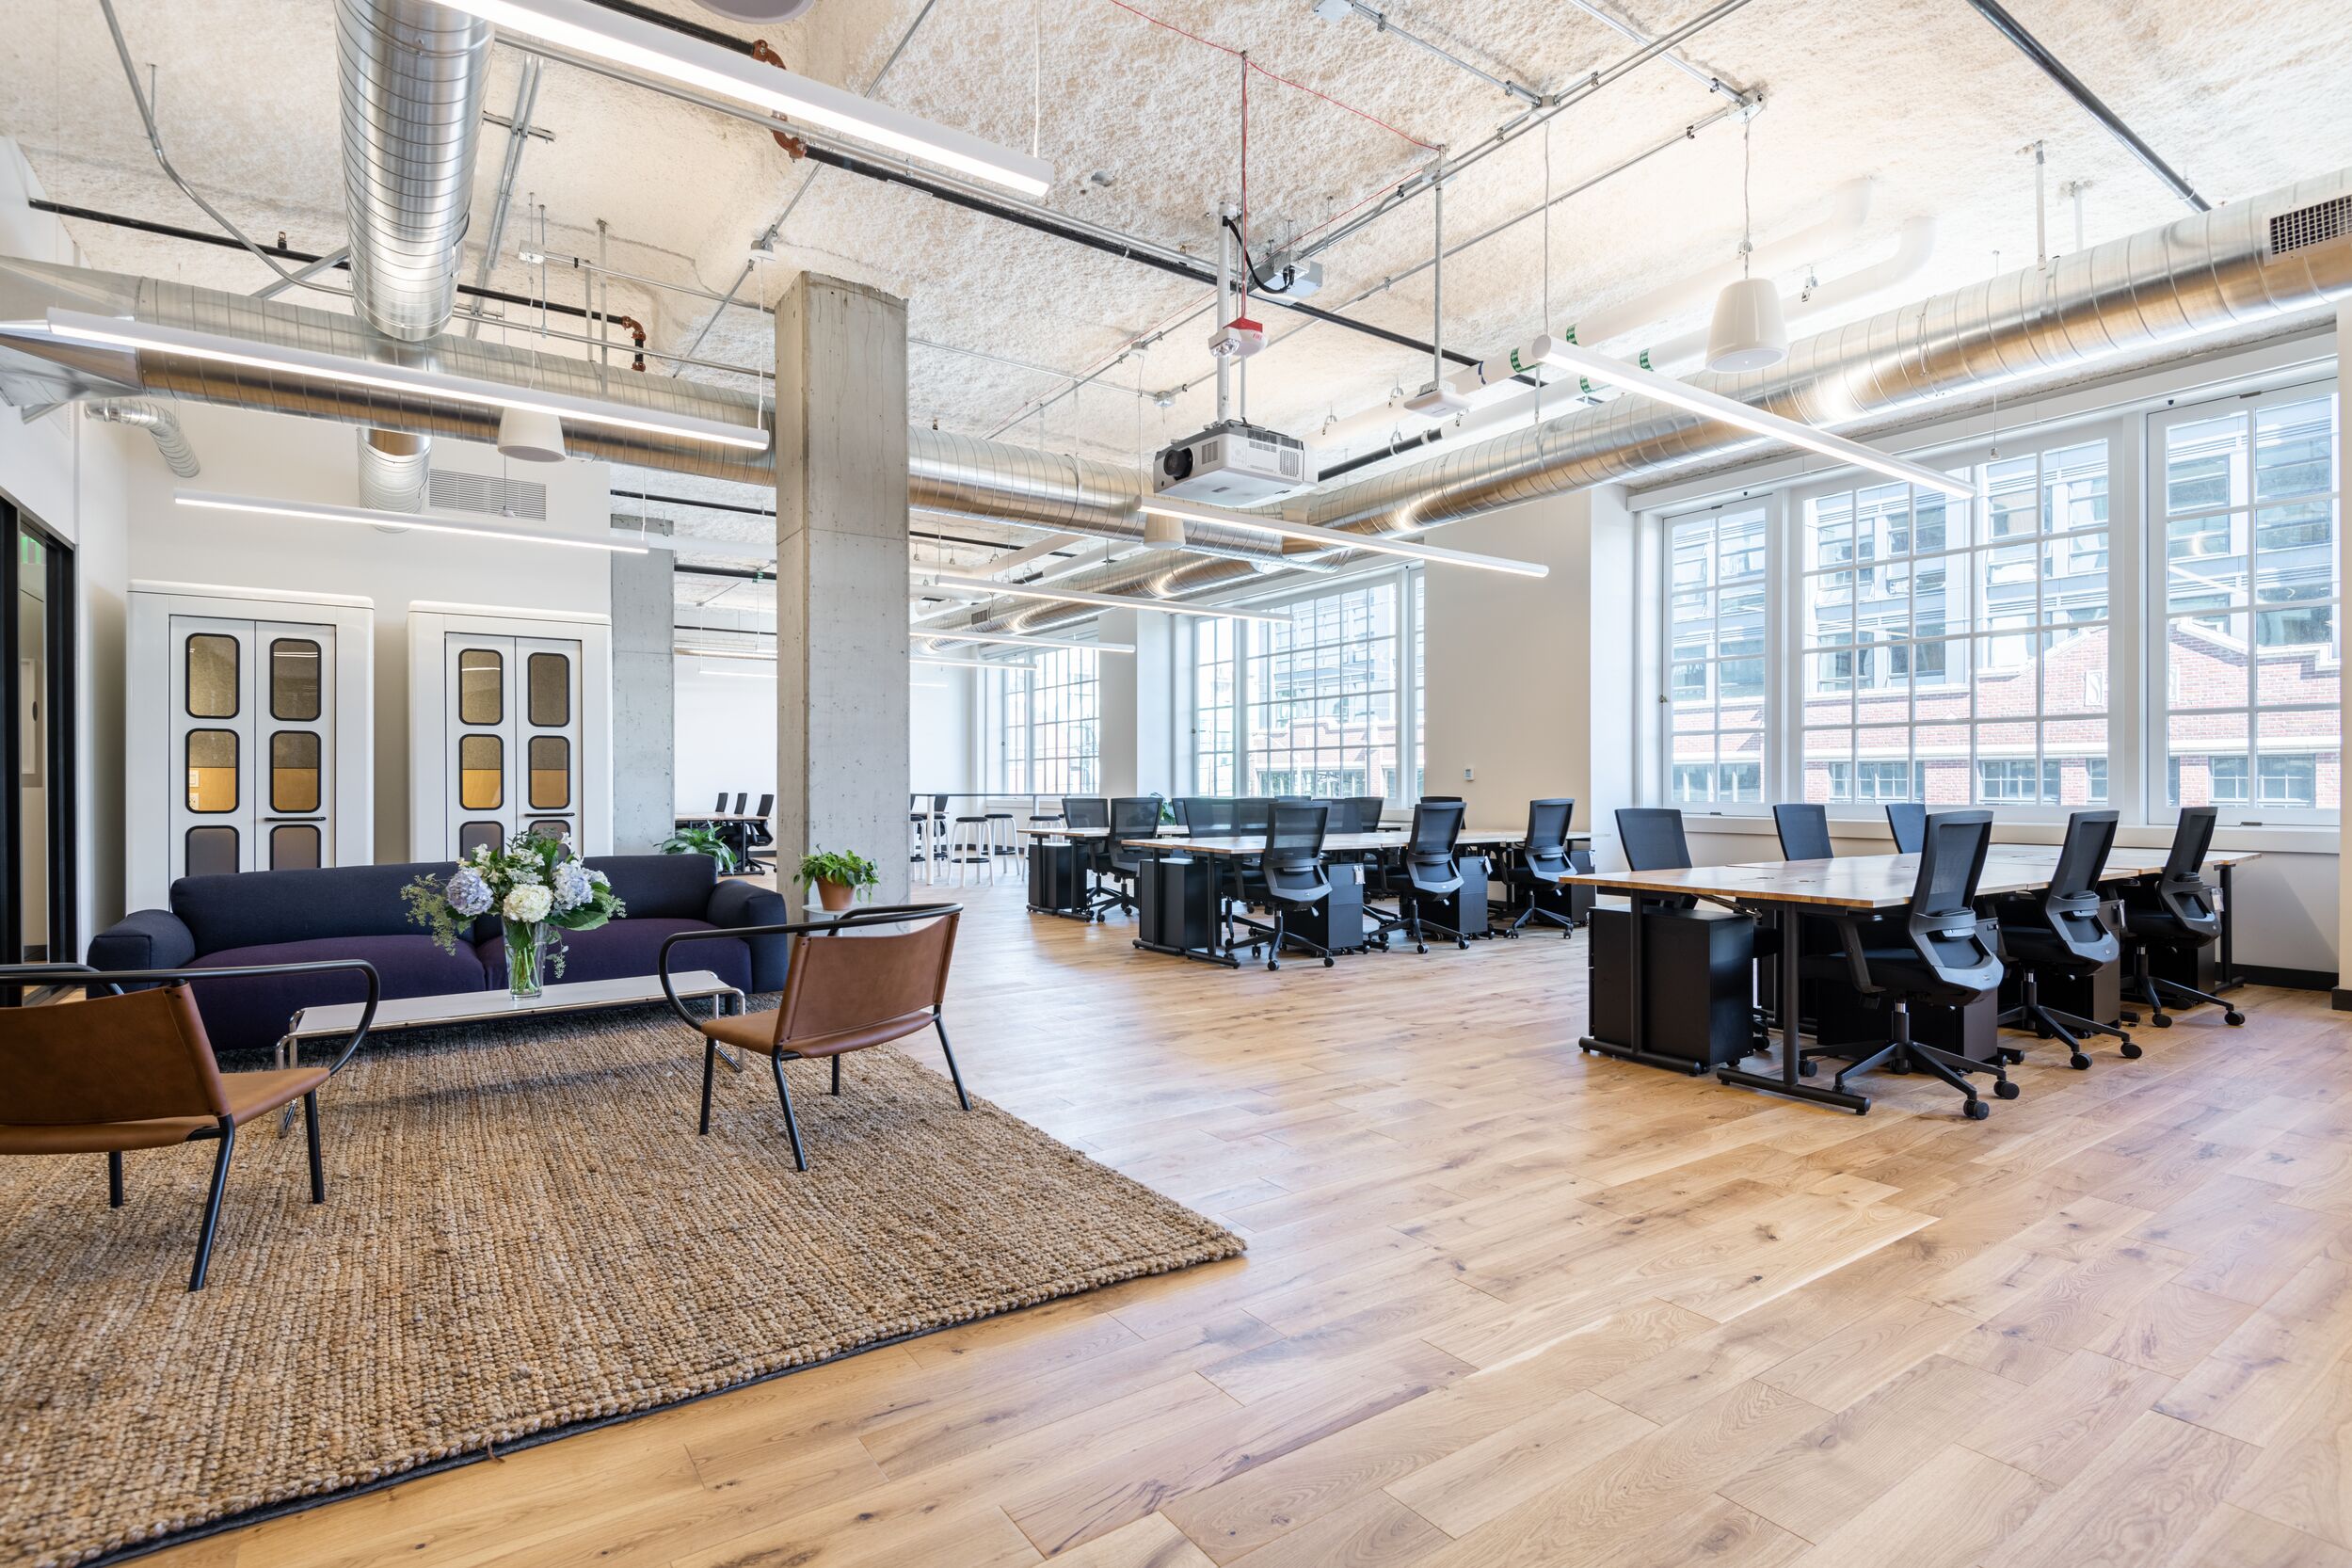 1525 11th Ave - Office Space in Seattle | WeWork